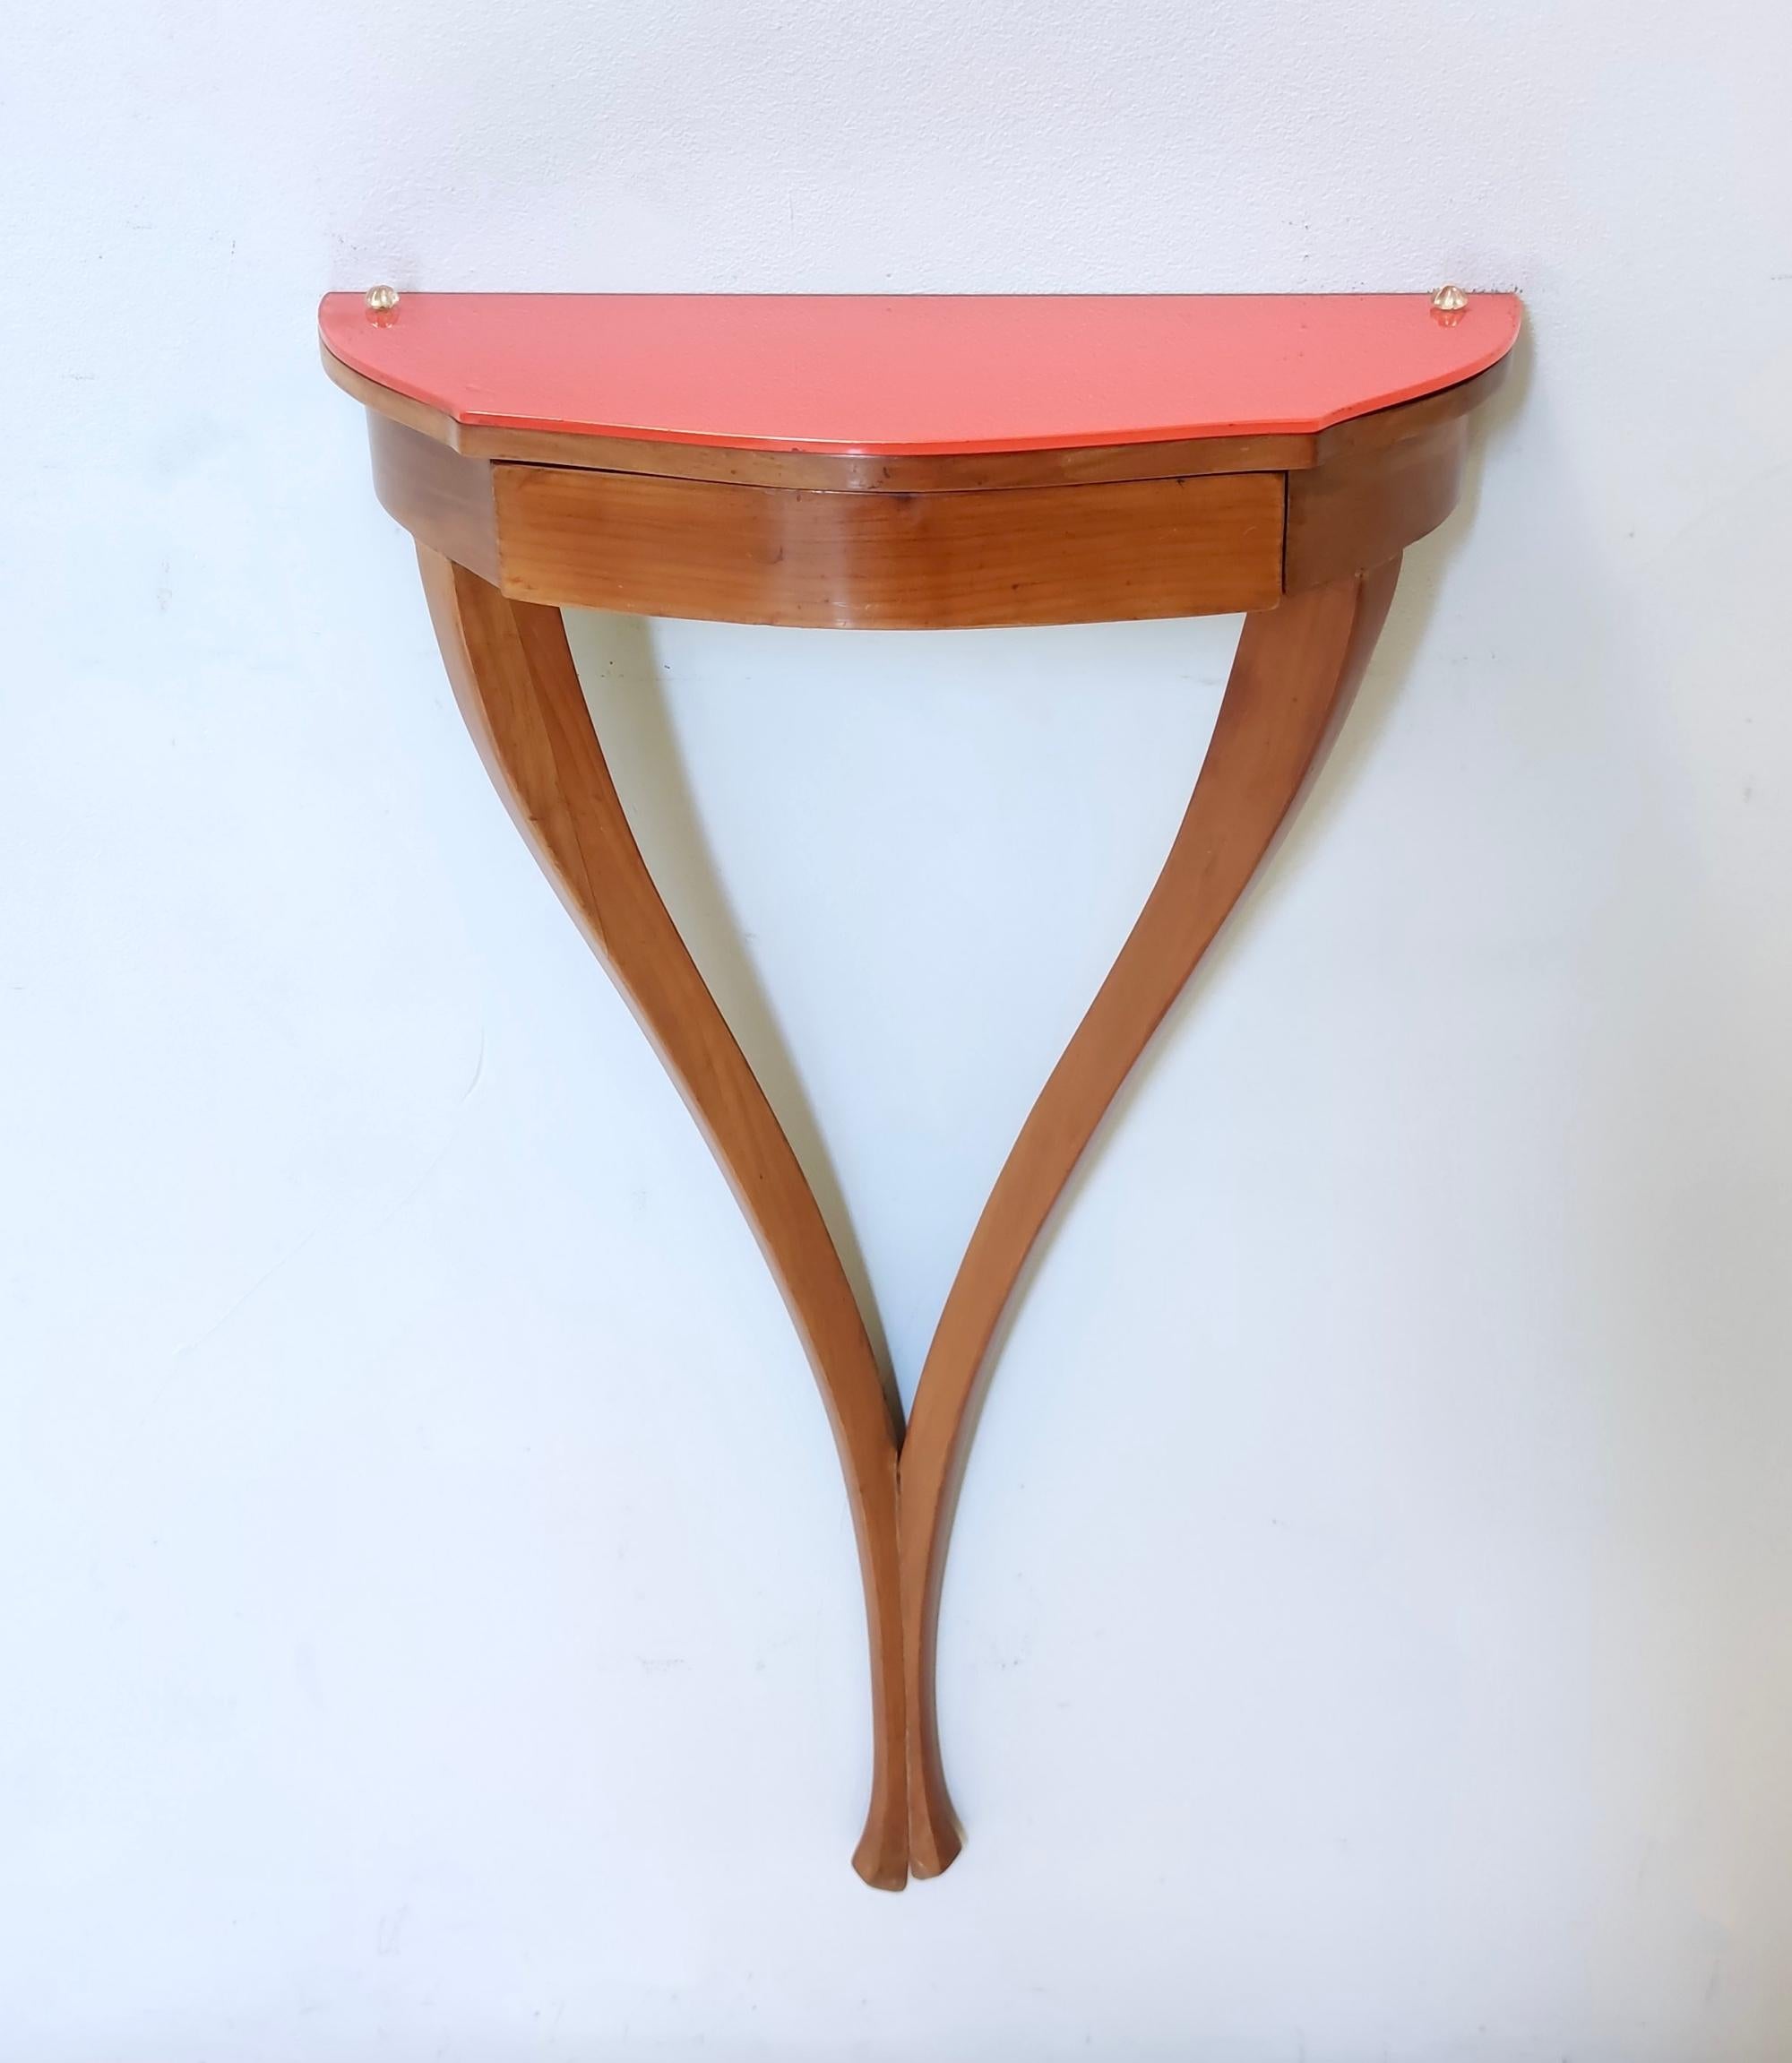 Italian Vintage Cherrywood Wall-Mounted Console Ascribable to Guglielmo Ulrich, Italy